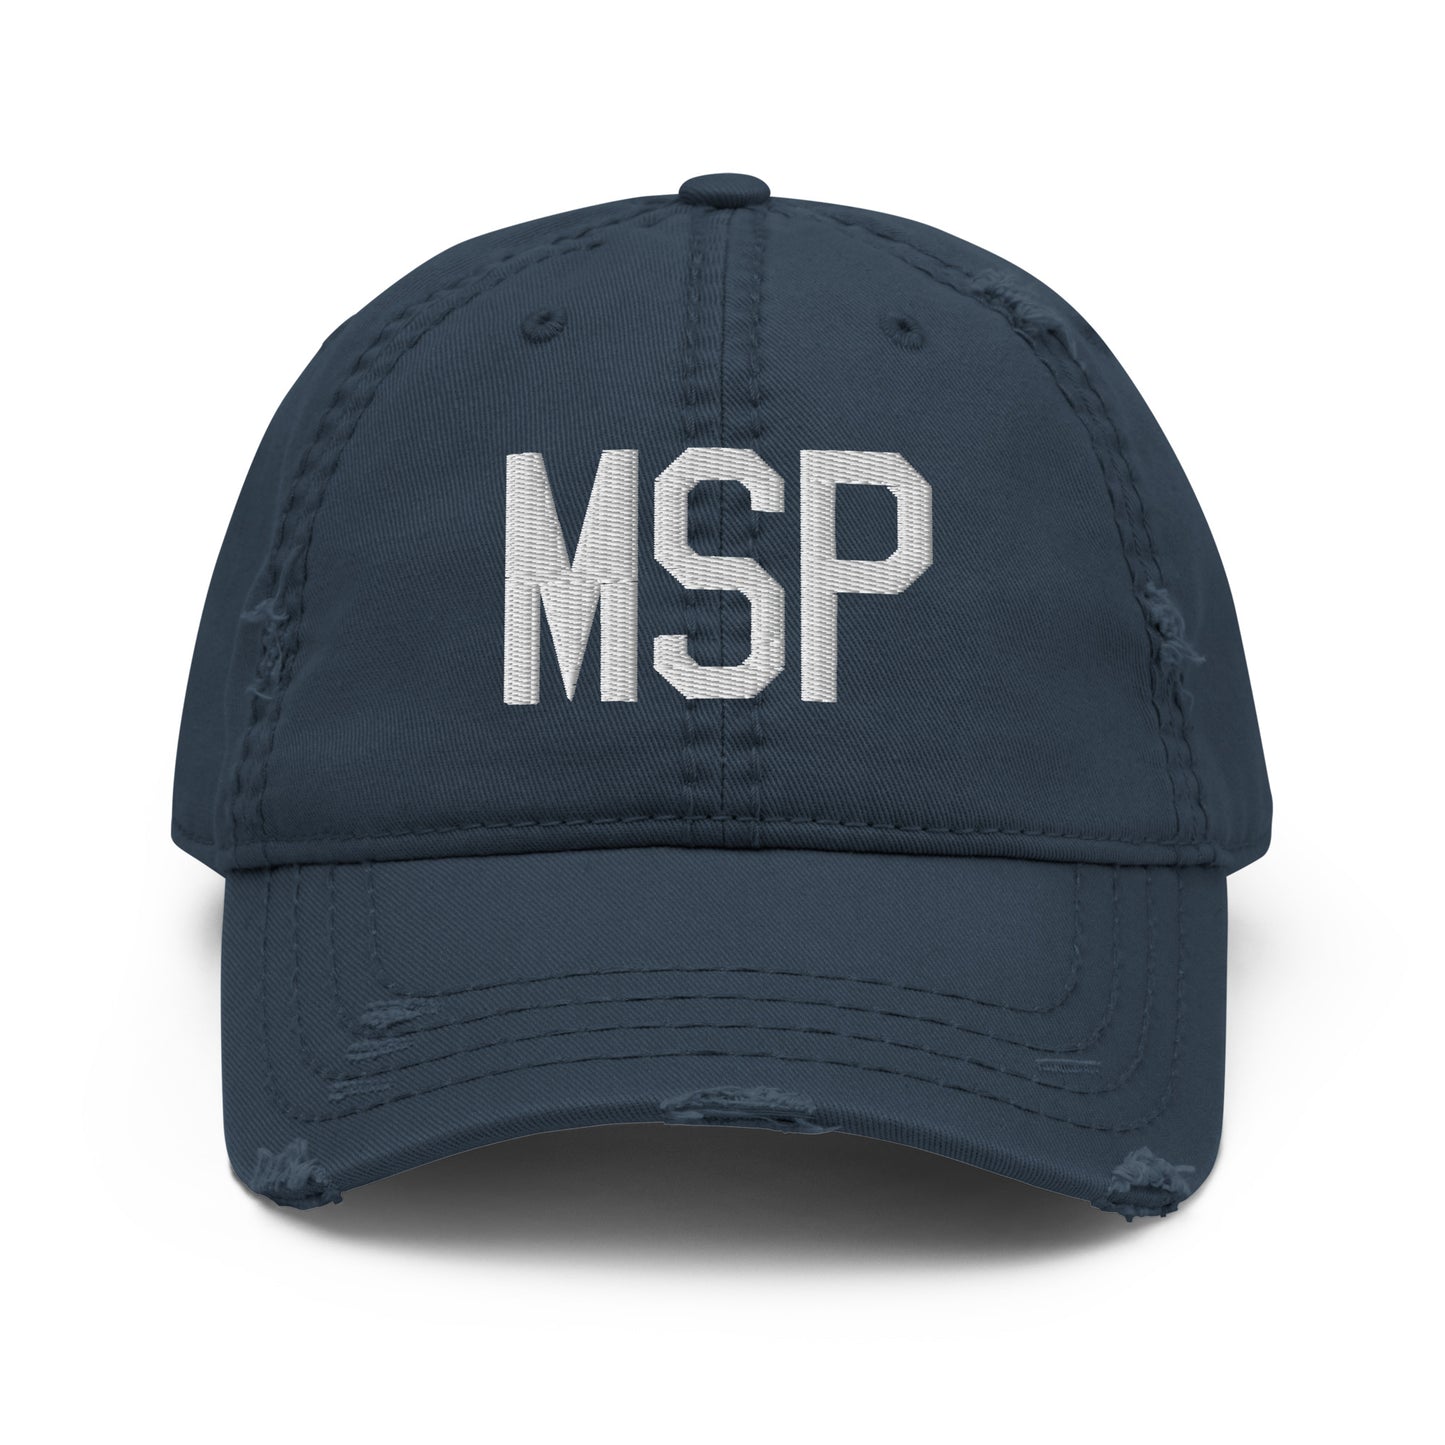 Airport Code Distressed Hat - White • MSP Minneapolis • YHM Designs - Image 13